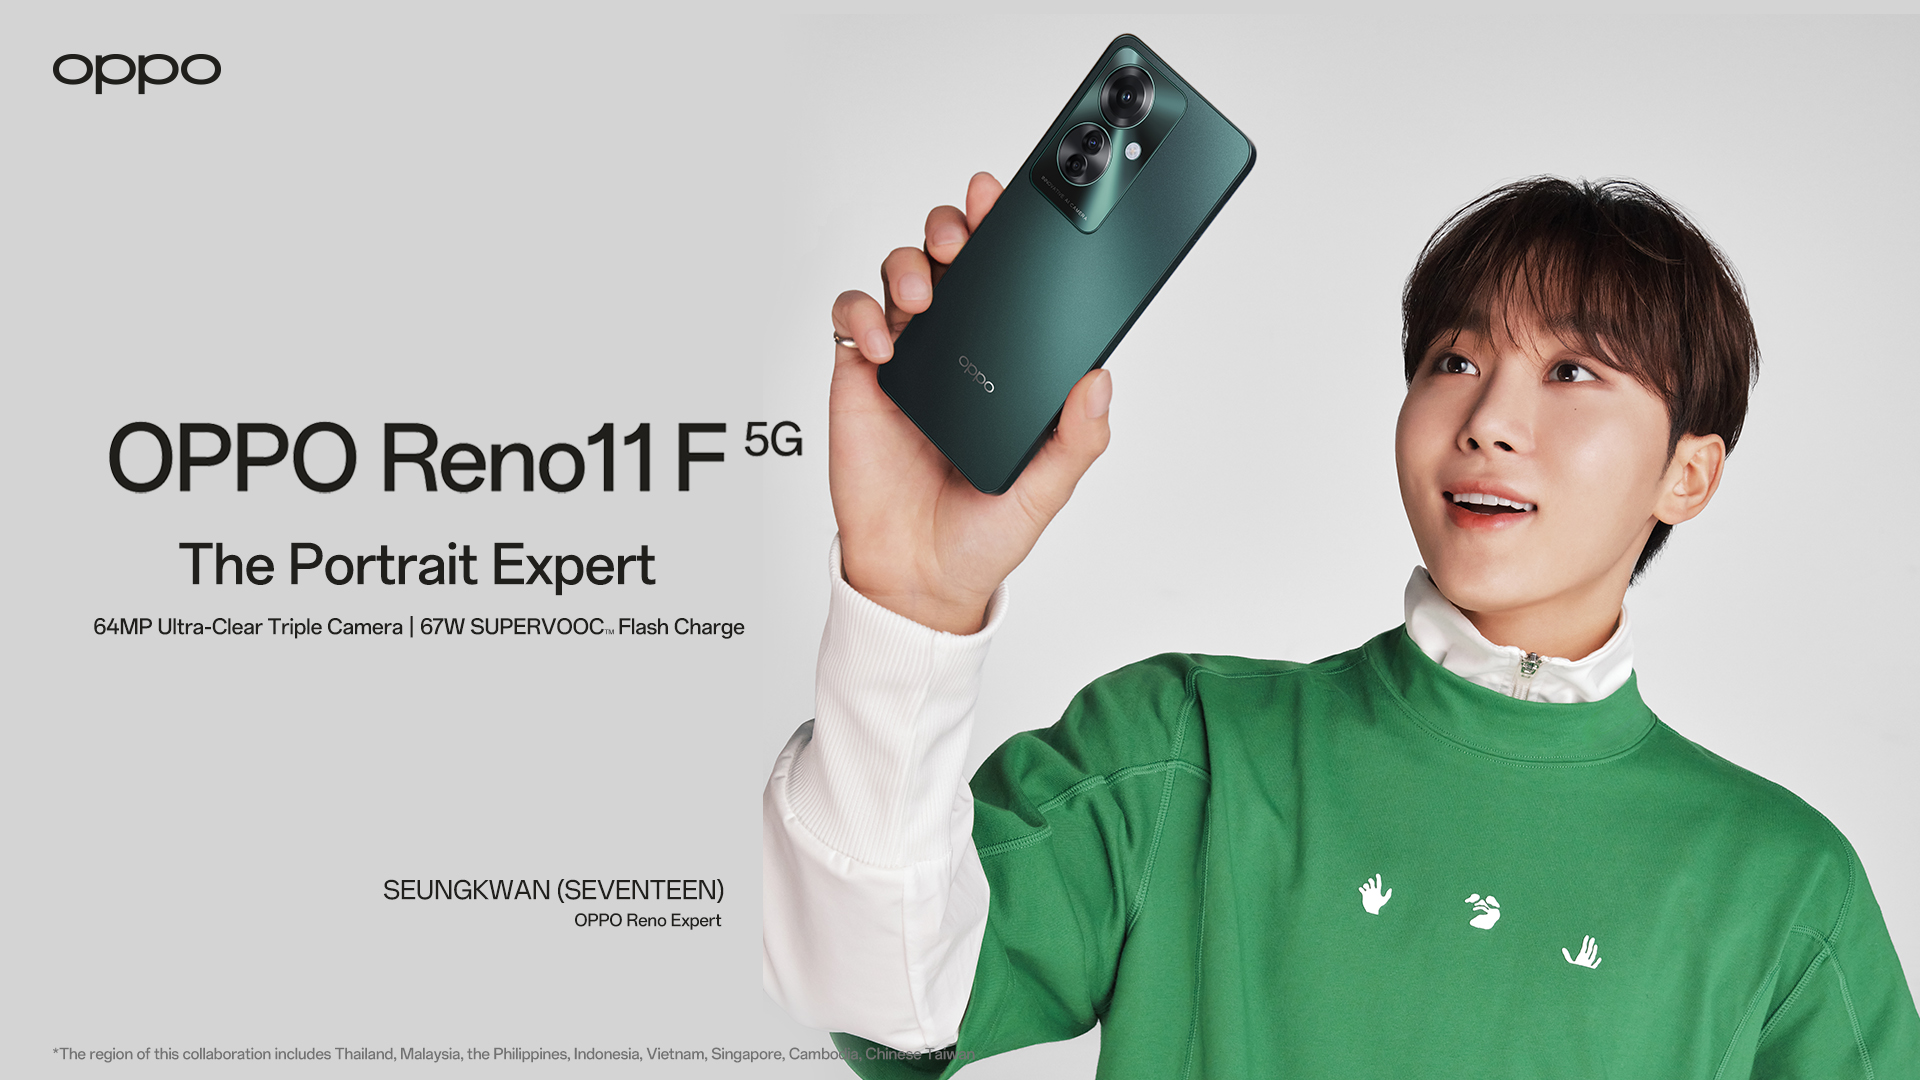 OPPO APAC Officially Announces BSS (SEVENTEEN) As The Newest OPPO Reno Experts